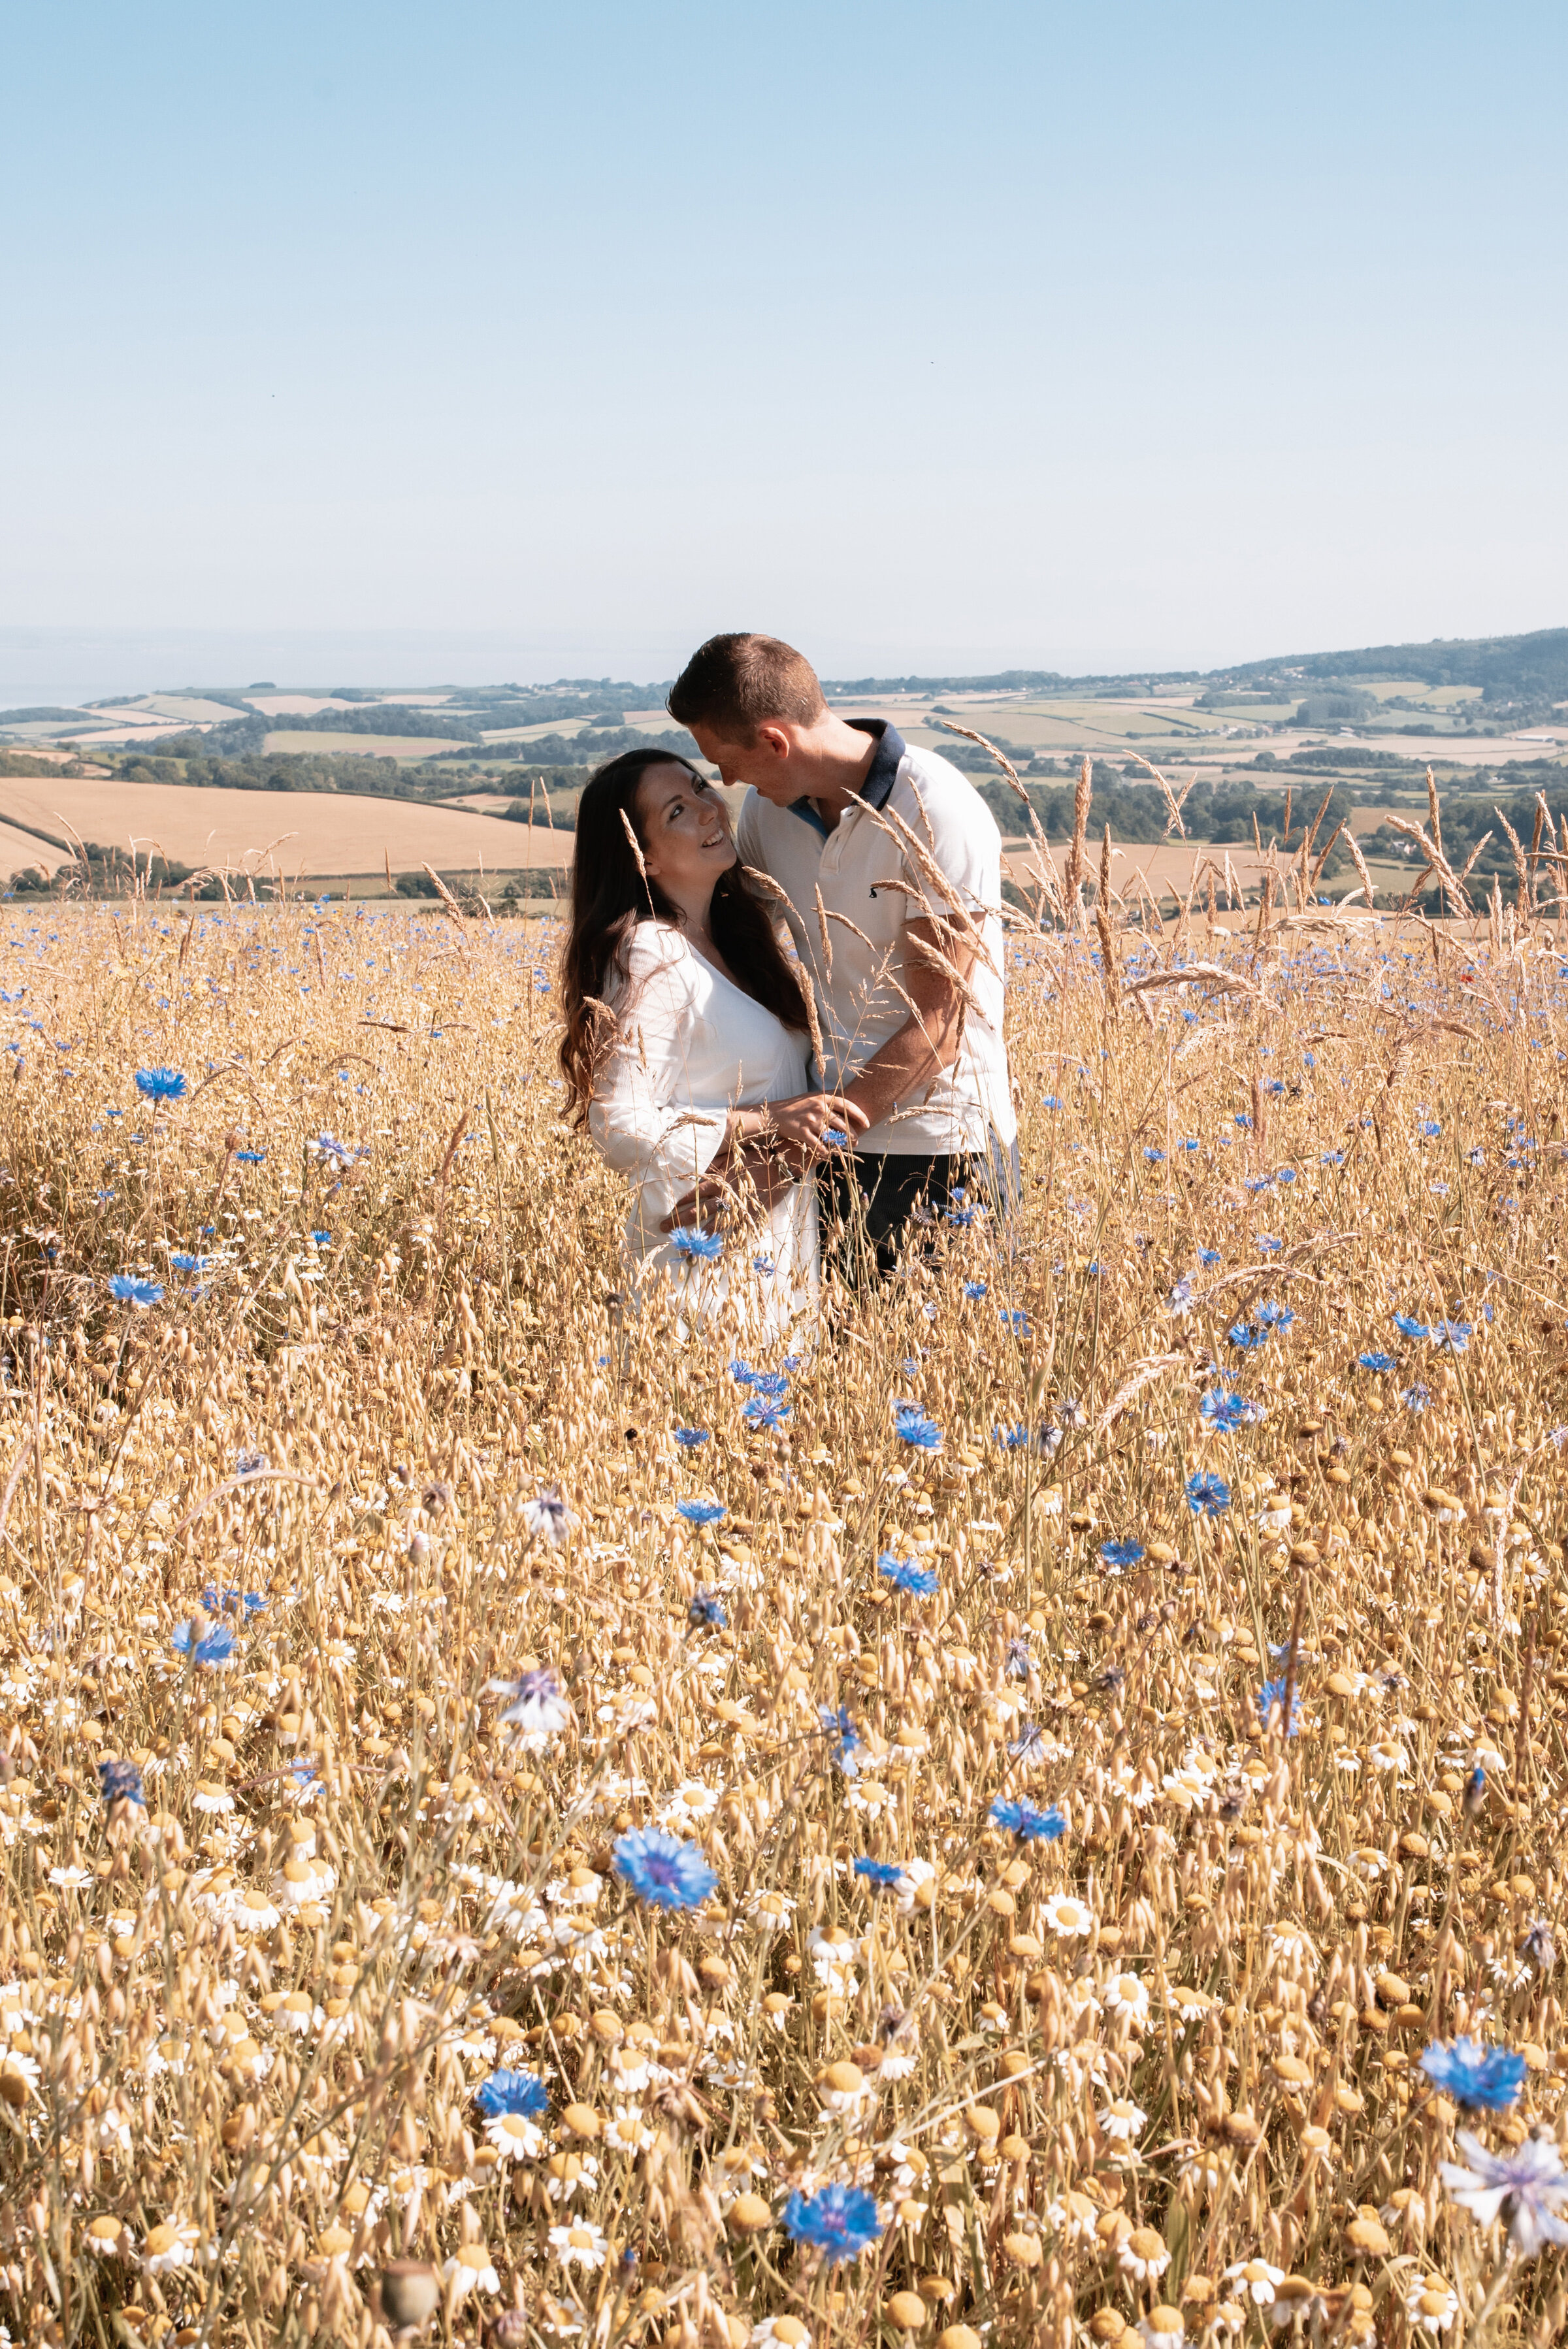 Man and woman gazing into each other’s eyes and laughing together in a field of wildflowers